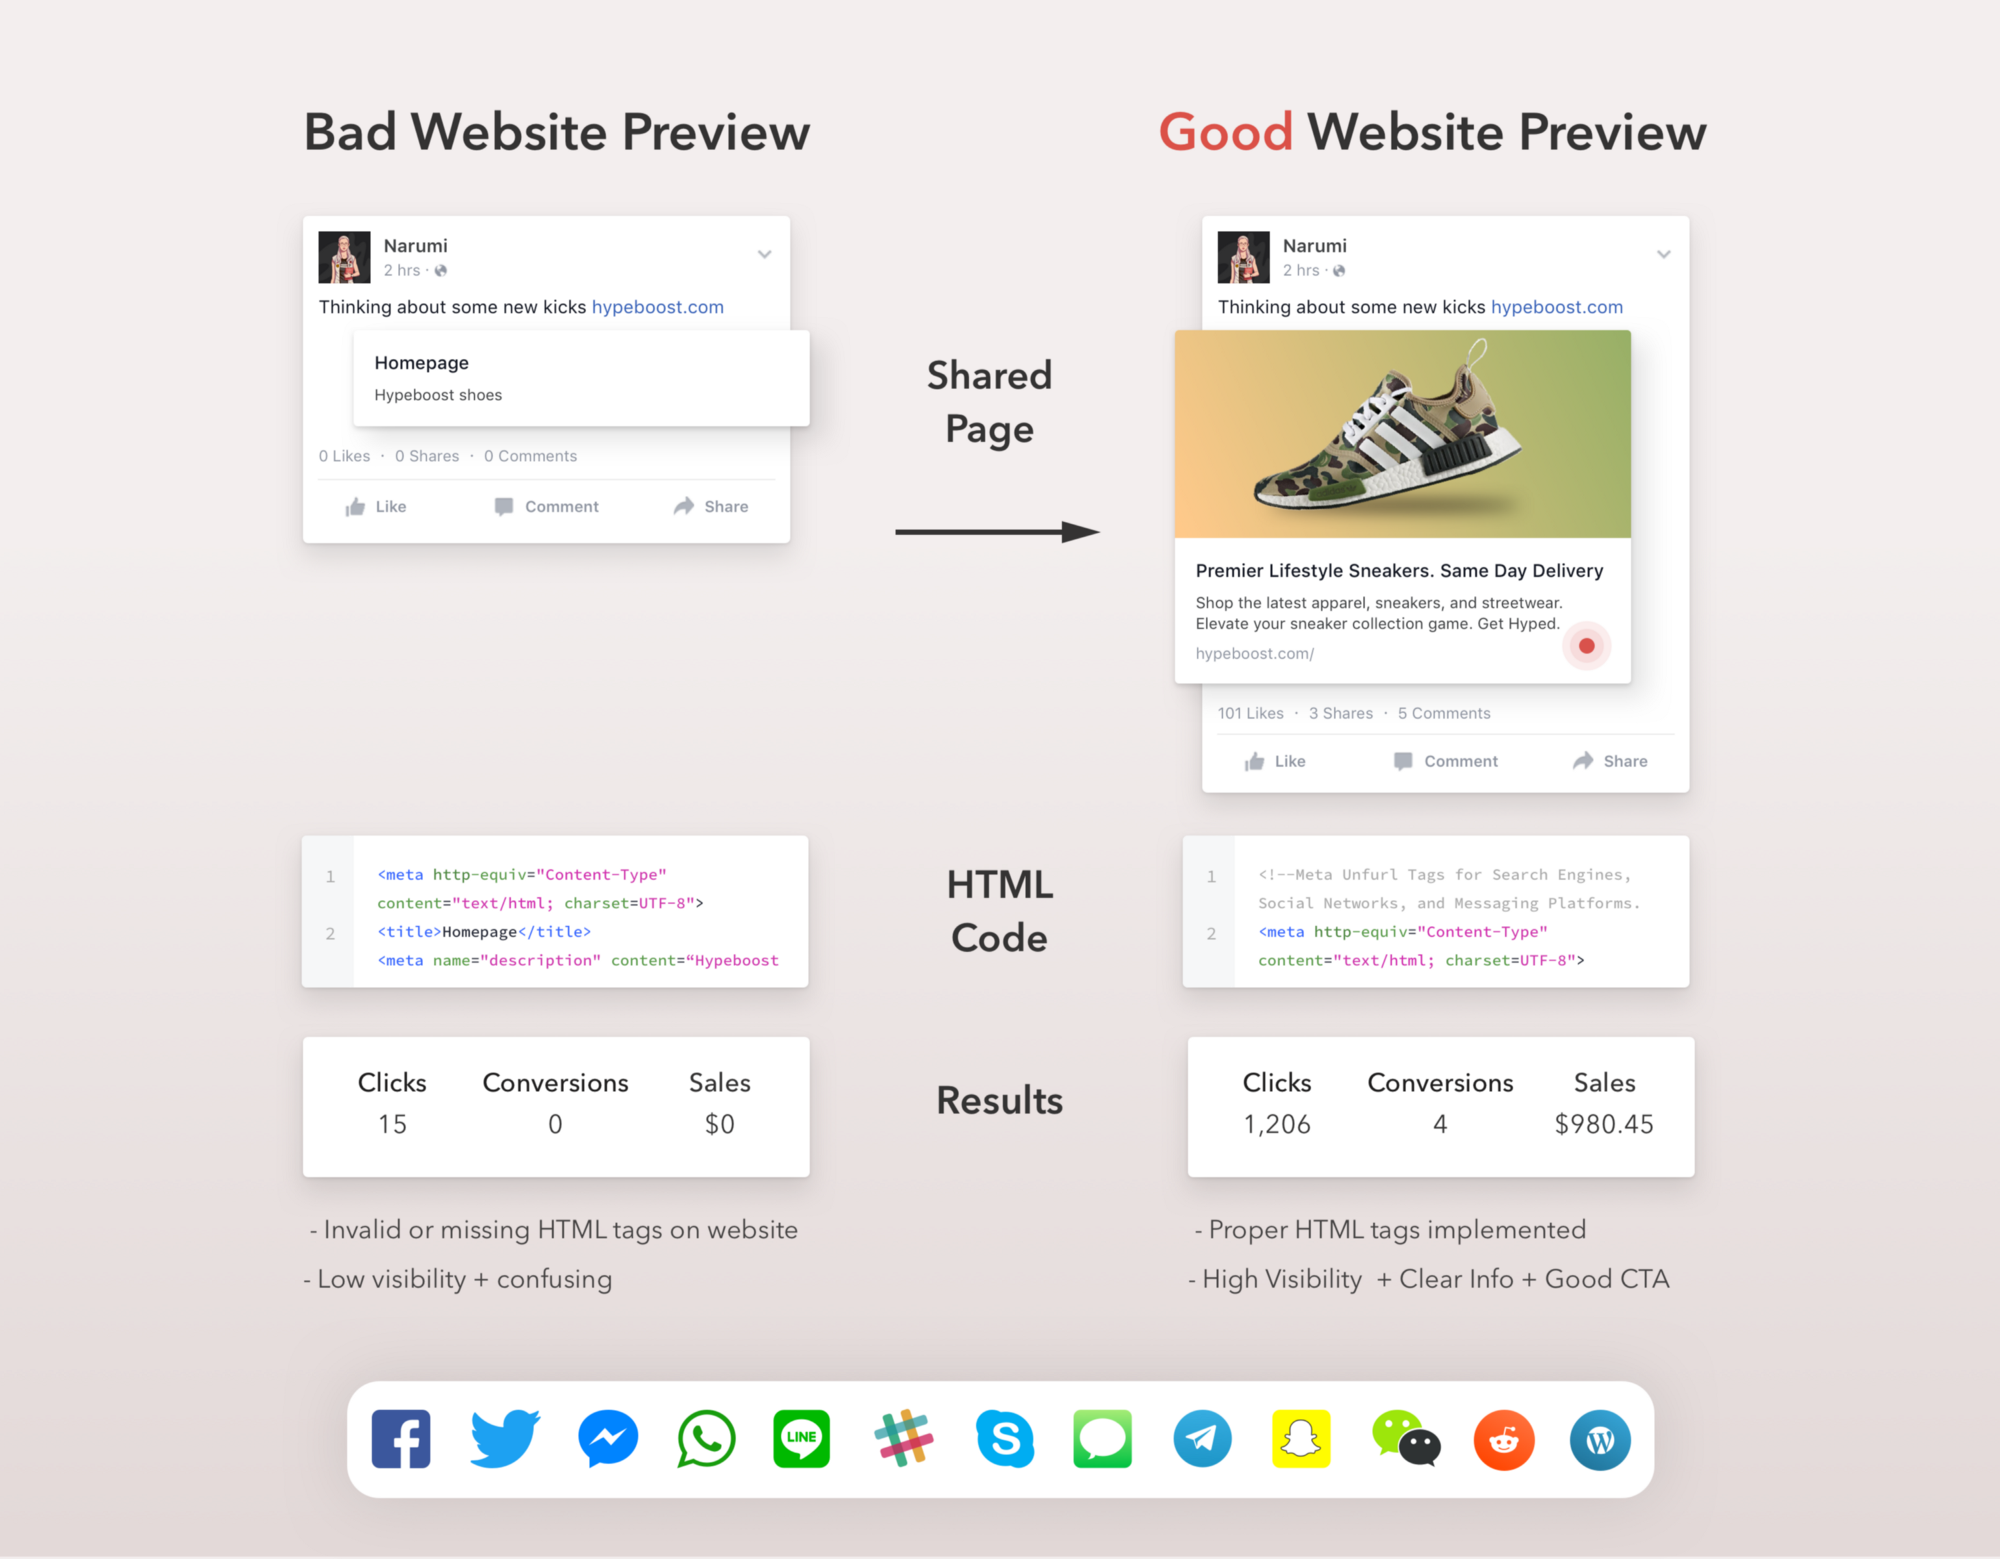 good website preview and bad website preview comparation